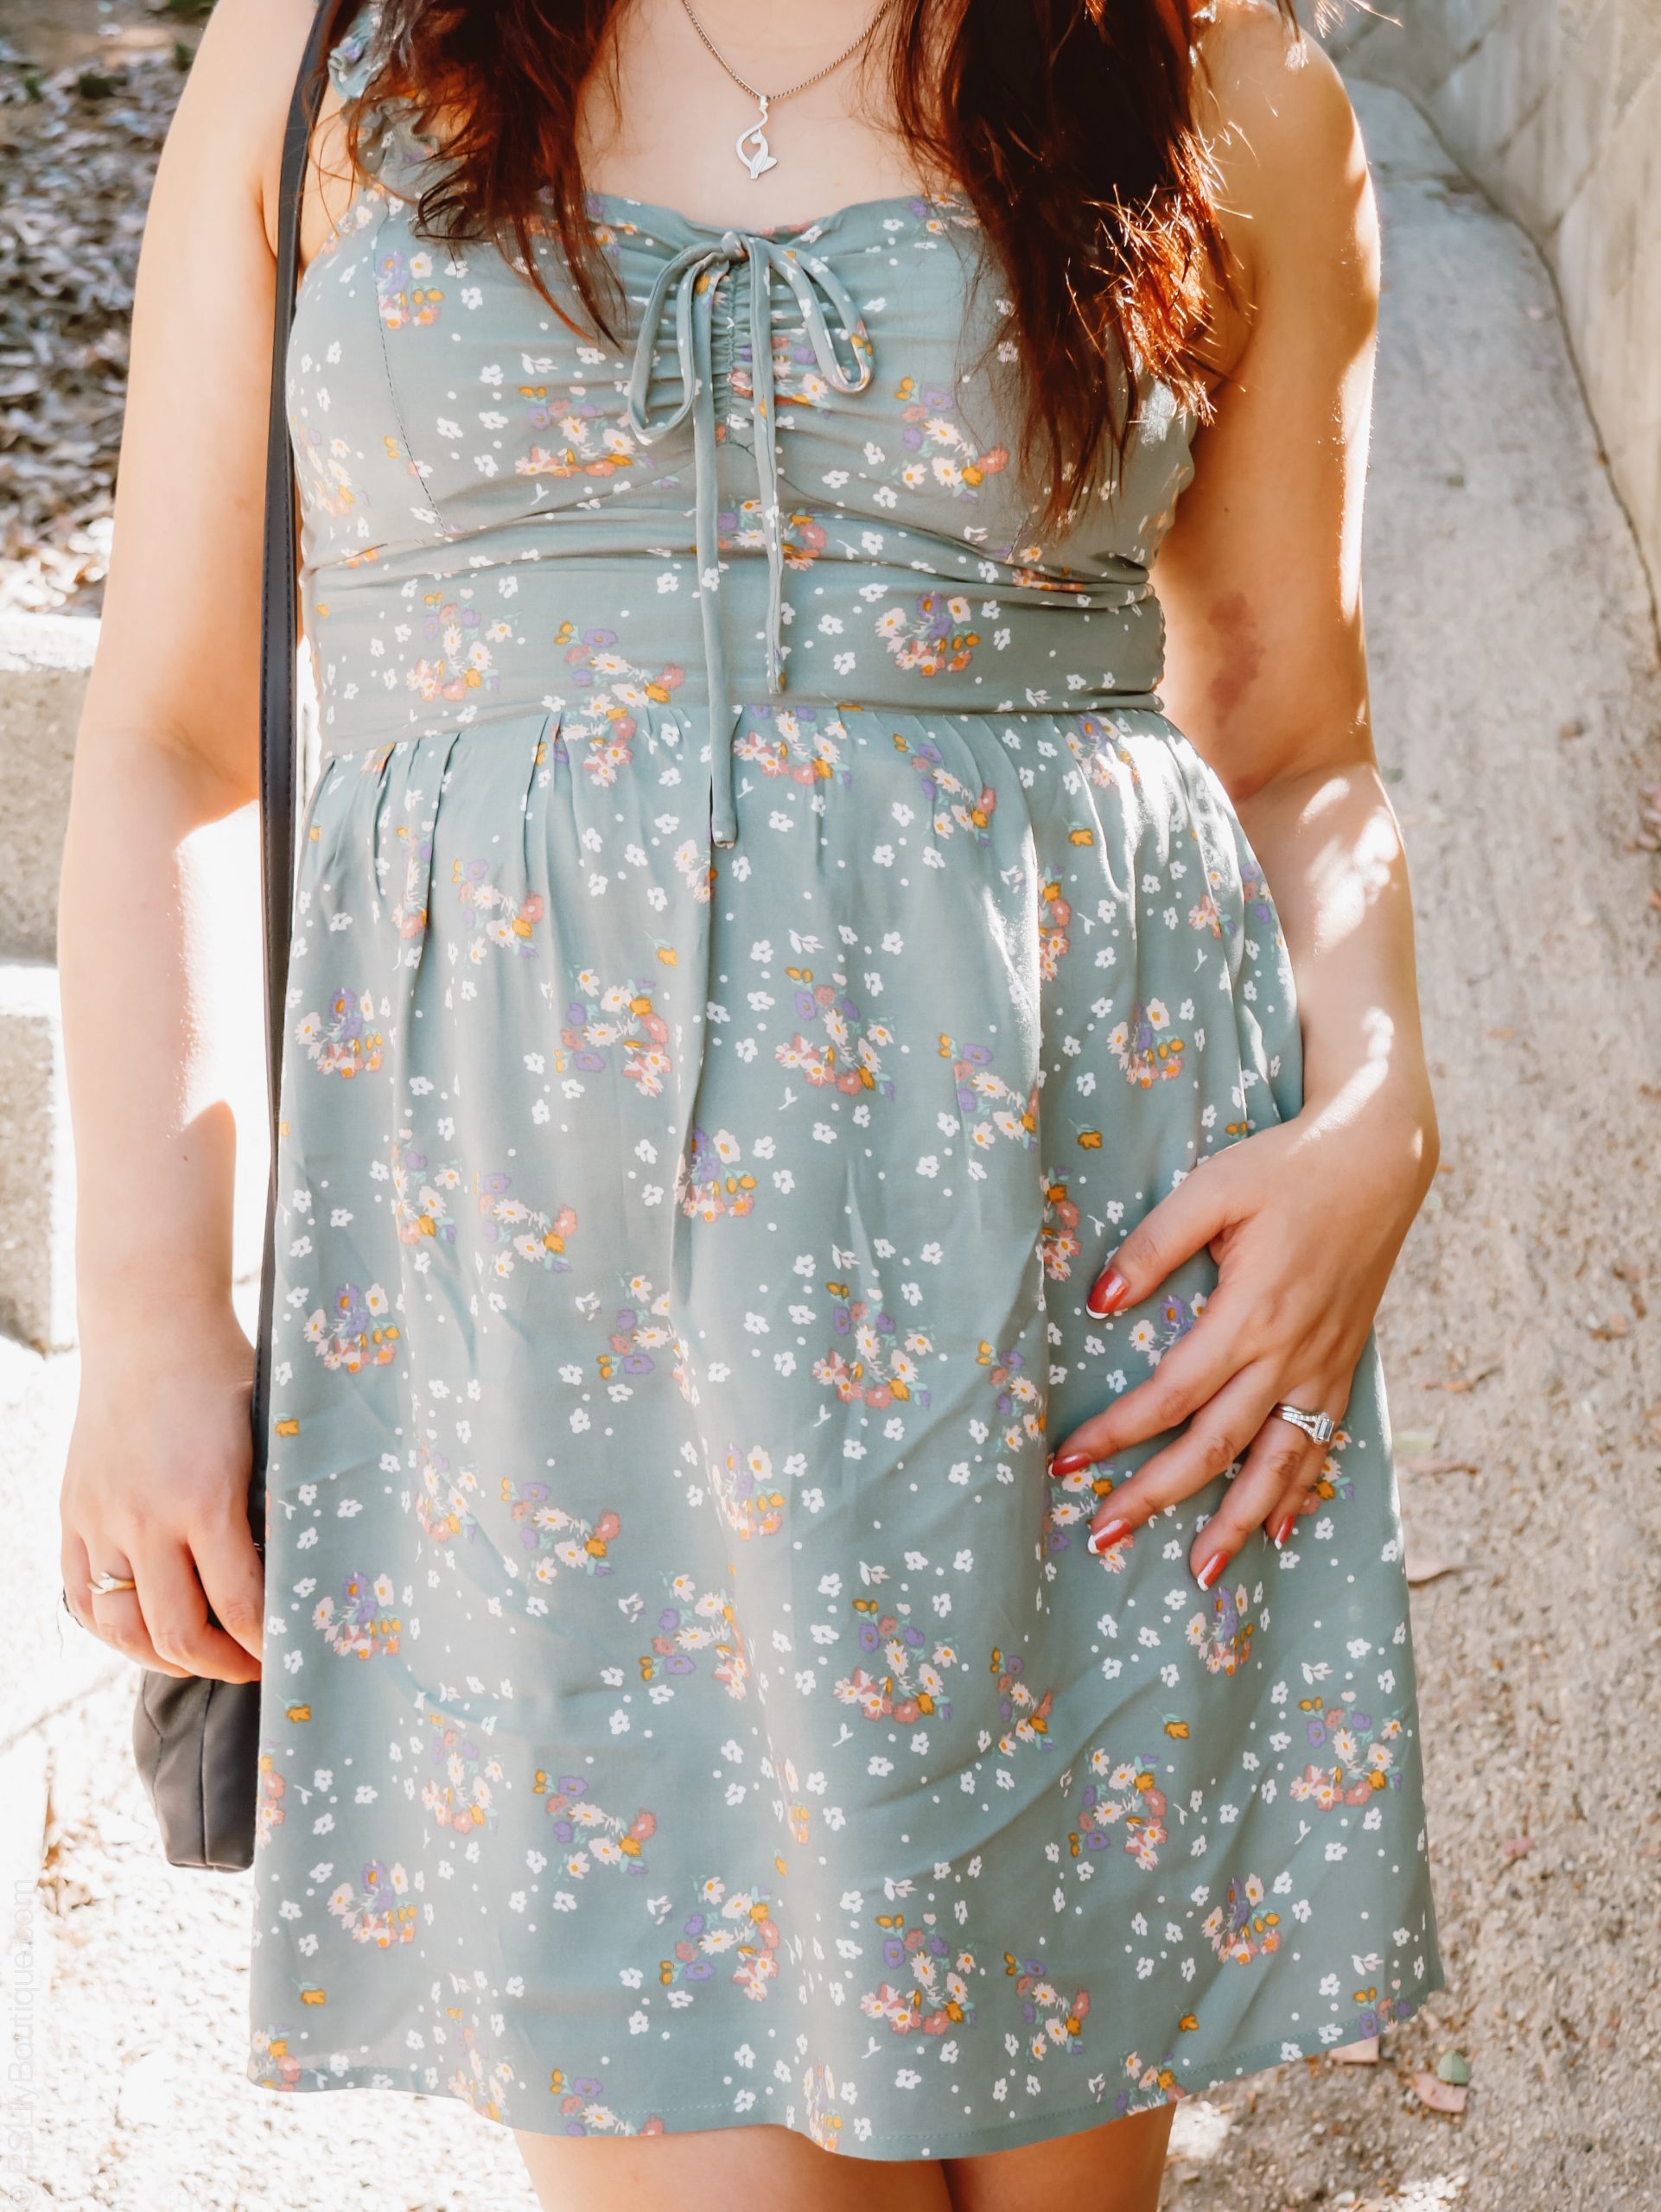 PSL_Griffith_Park-light-green-floral-print-mini-cami-dress-Novica-cat-necklace-nails-bag-summer-2019-outfit-idea-all-about-the-details-7-3-19